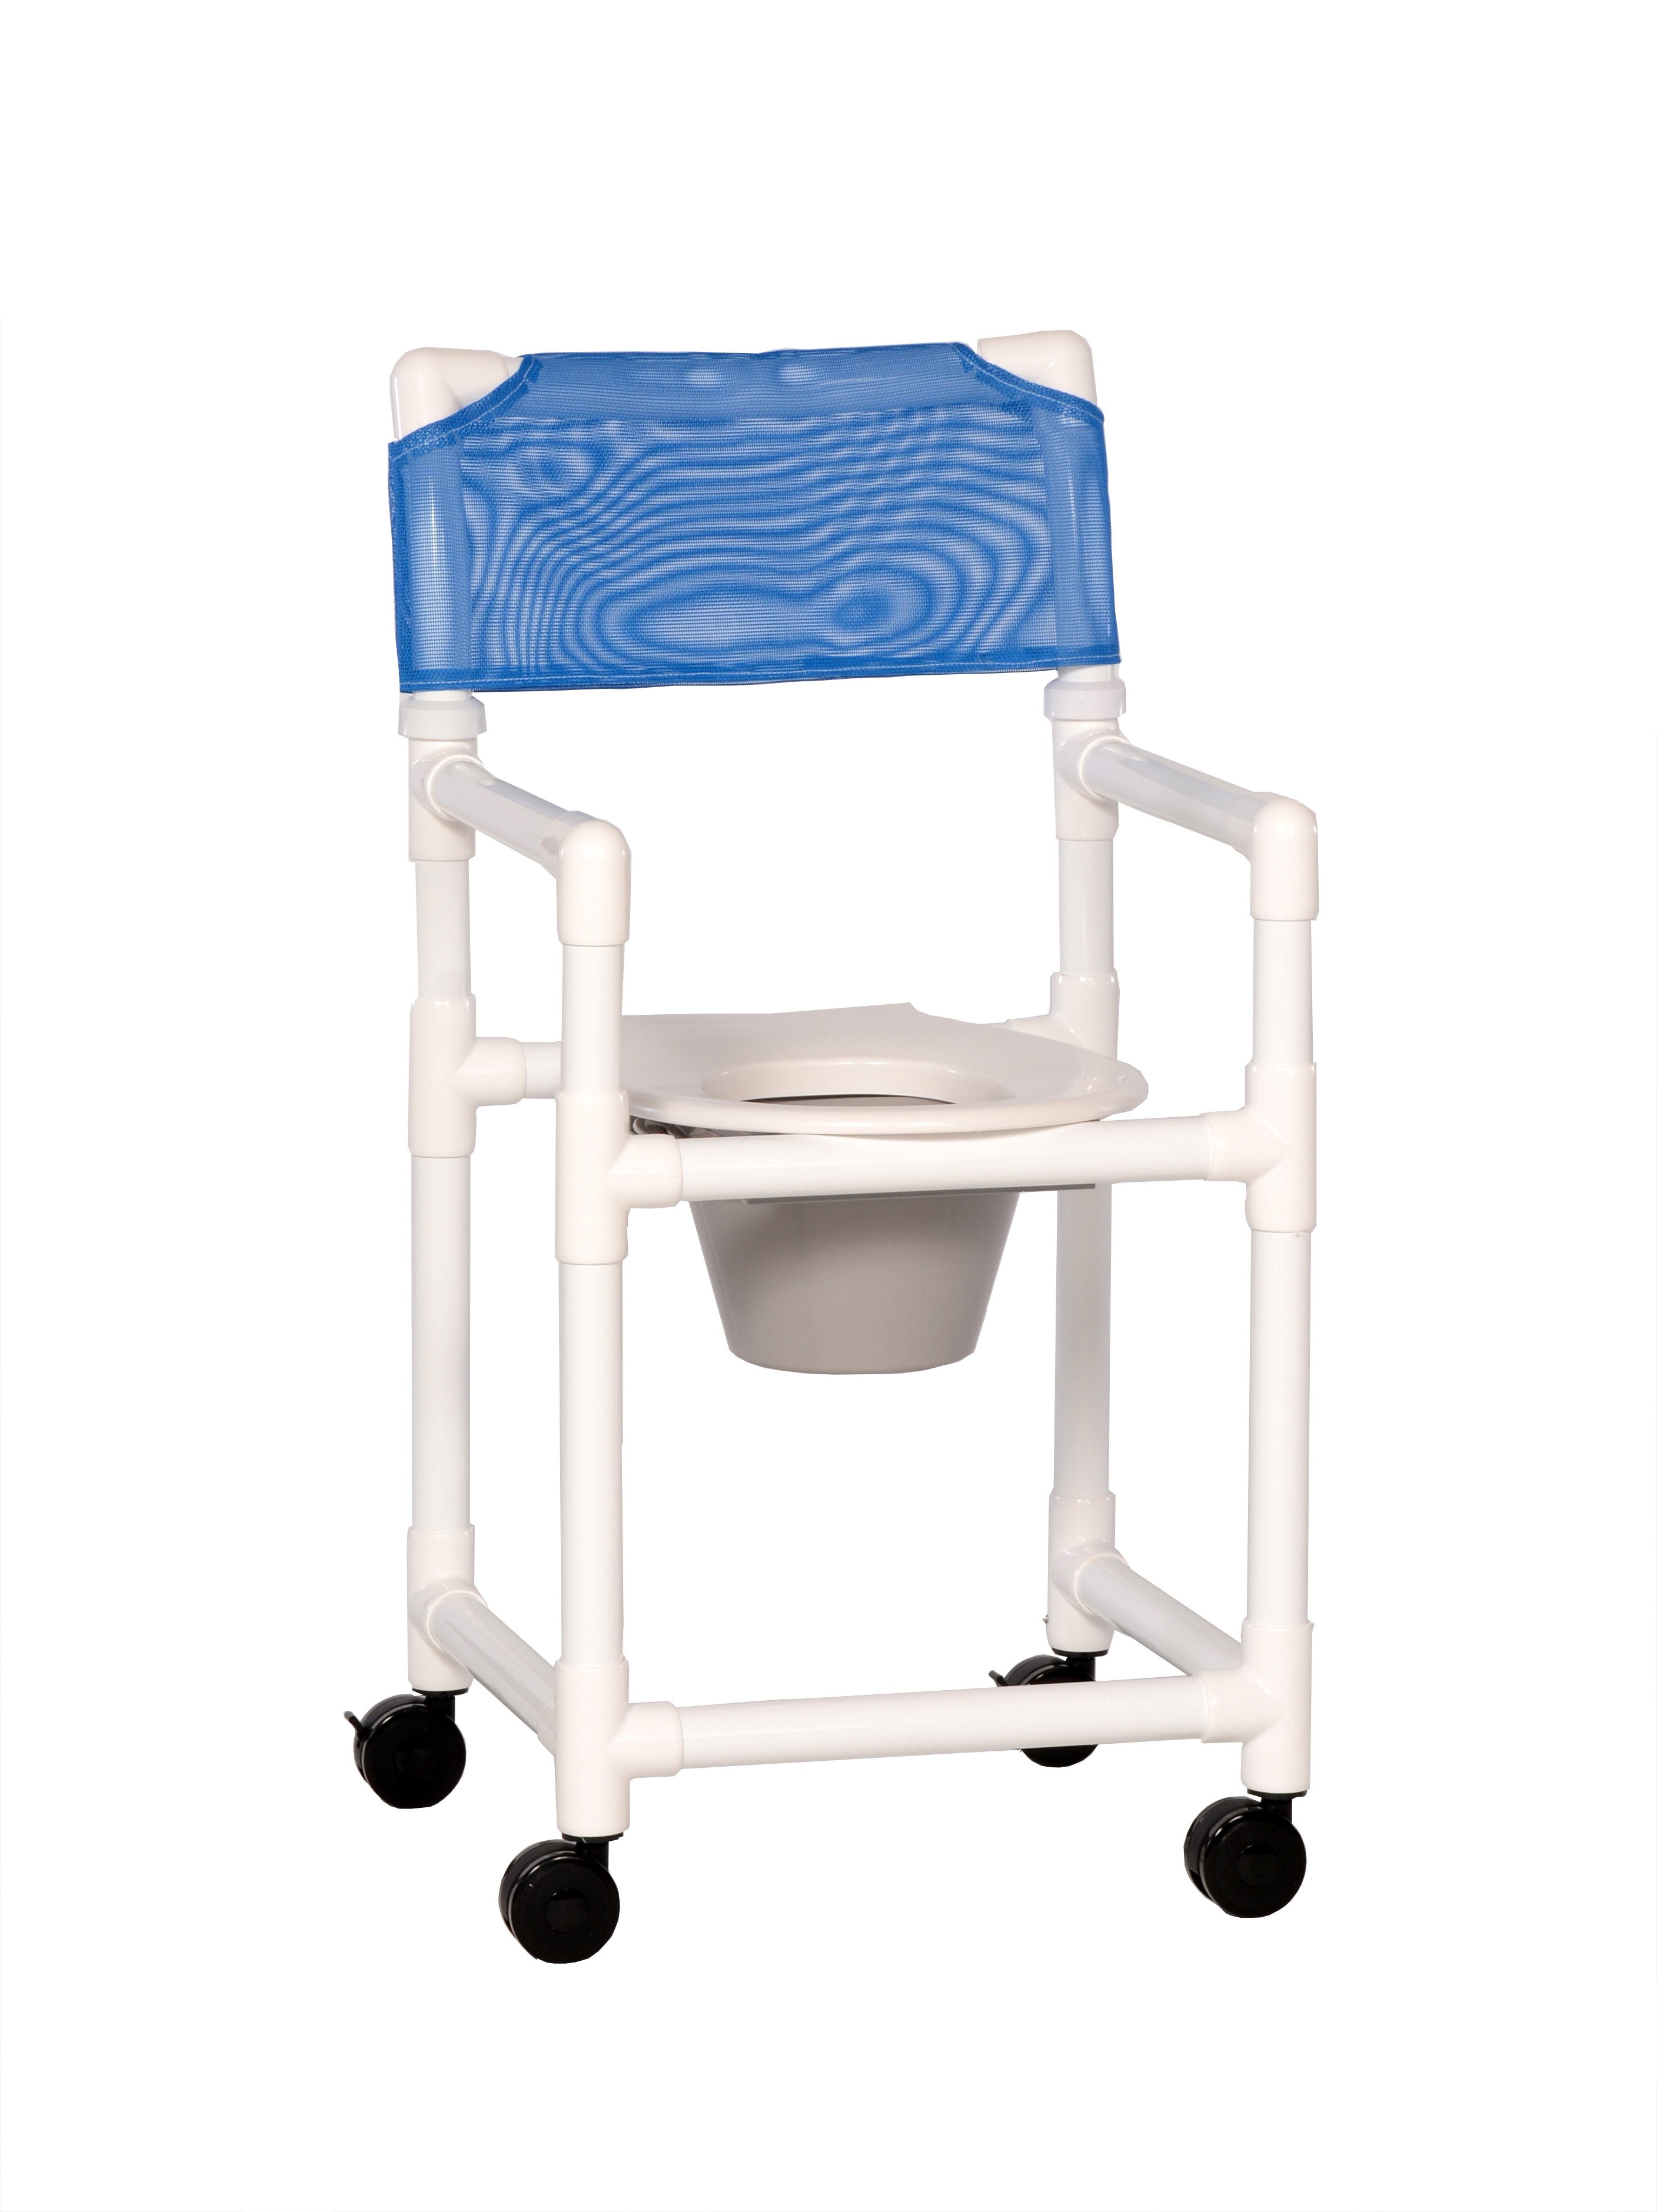 Commode / Shower Chair ipu® Standard Fixed Arms PVC Frame Mesh Backrest 18 Inch Seat Width 300 lbs. Weight Capacity